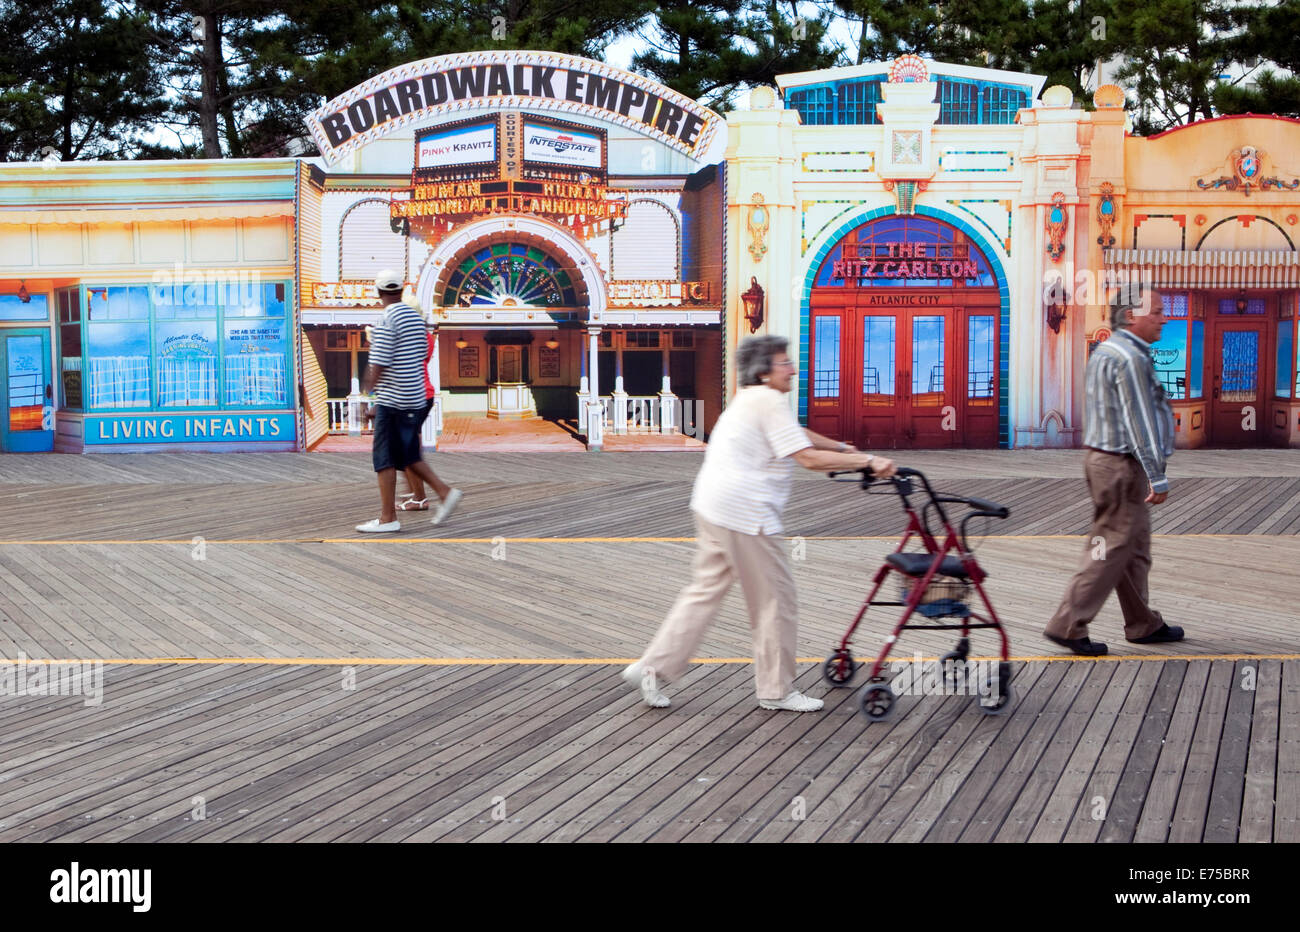 People walk in front of a display for tv show Boardwalk Empire on the boardwalk at Atlantic City, New Jersey Stock Photo